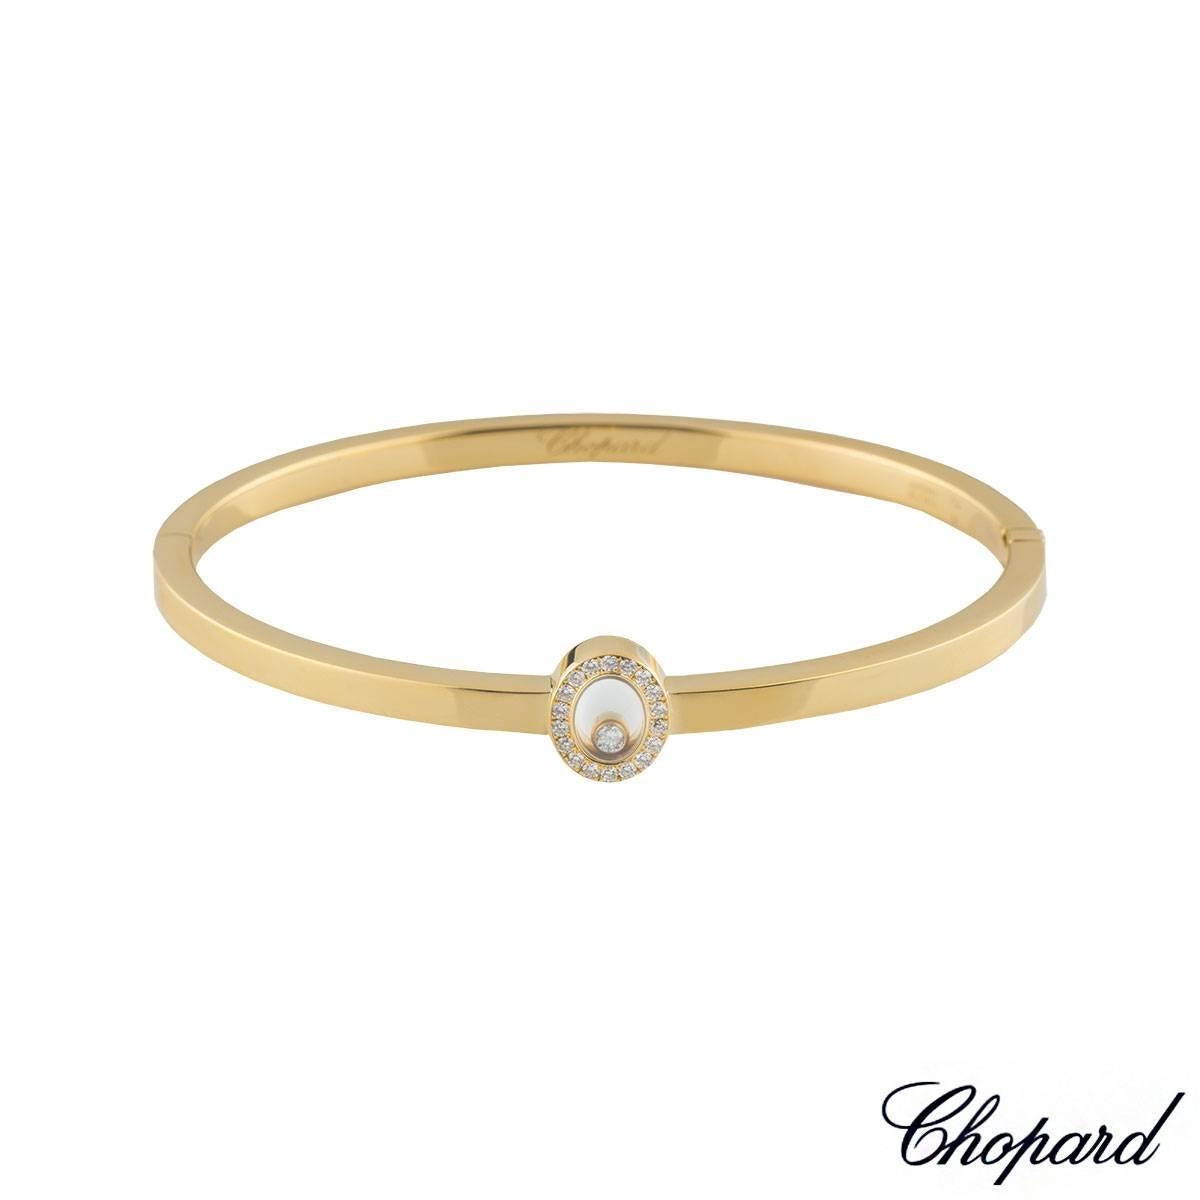 A dainty 18k yellow gold Chopard bangle from the Happy Diamonds collection. The bangle comprises of a diamond oval surround is set with 18 round brilliant cut diamonds, containing the signature floating diamond totalling 0.05ct, G colour and VS